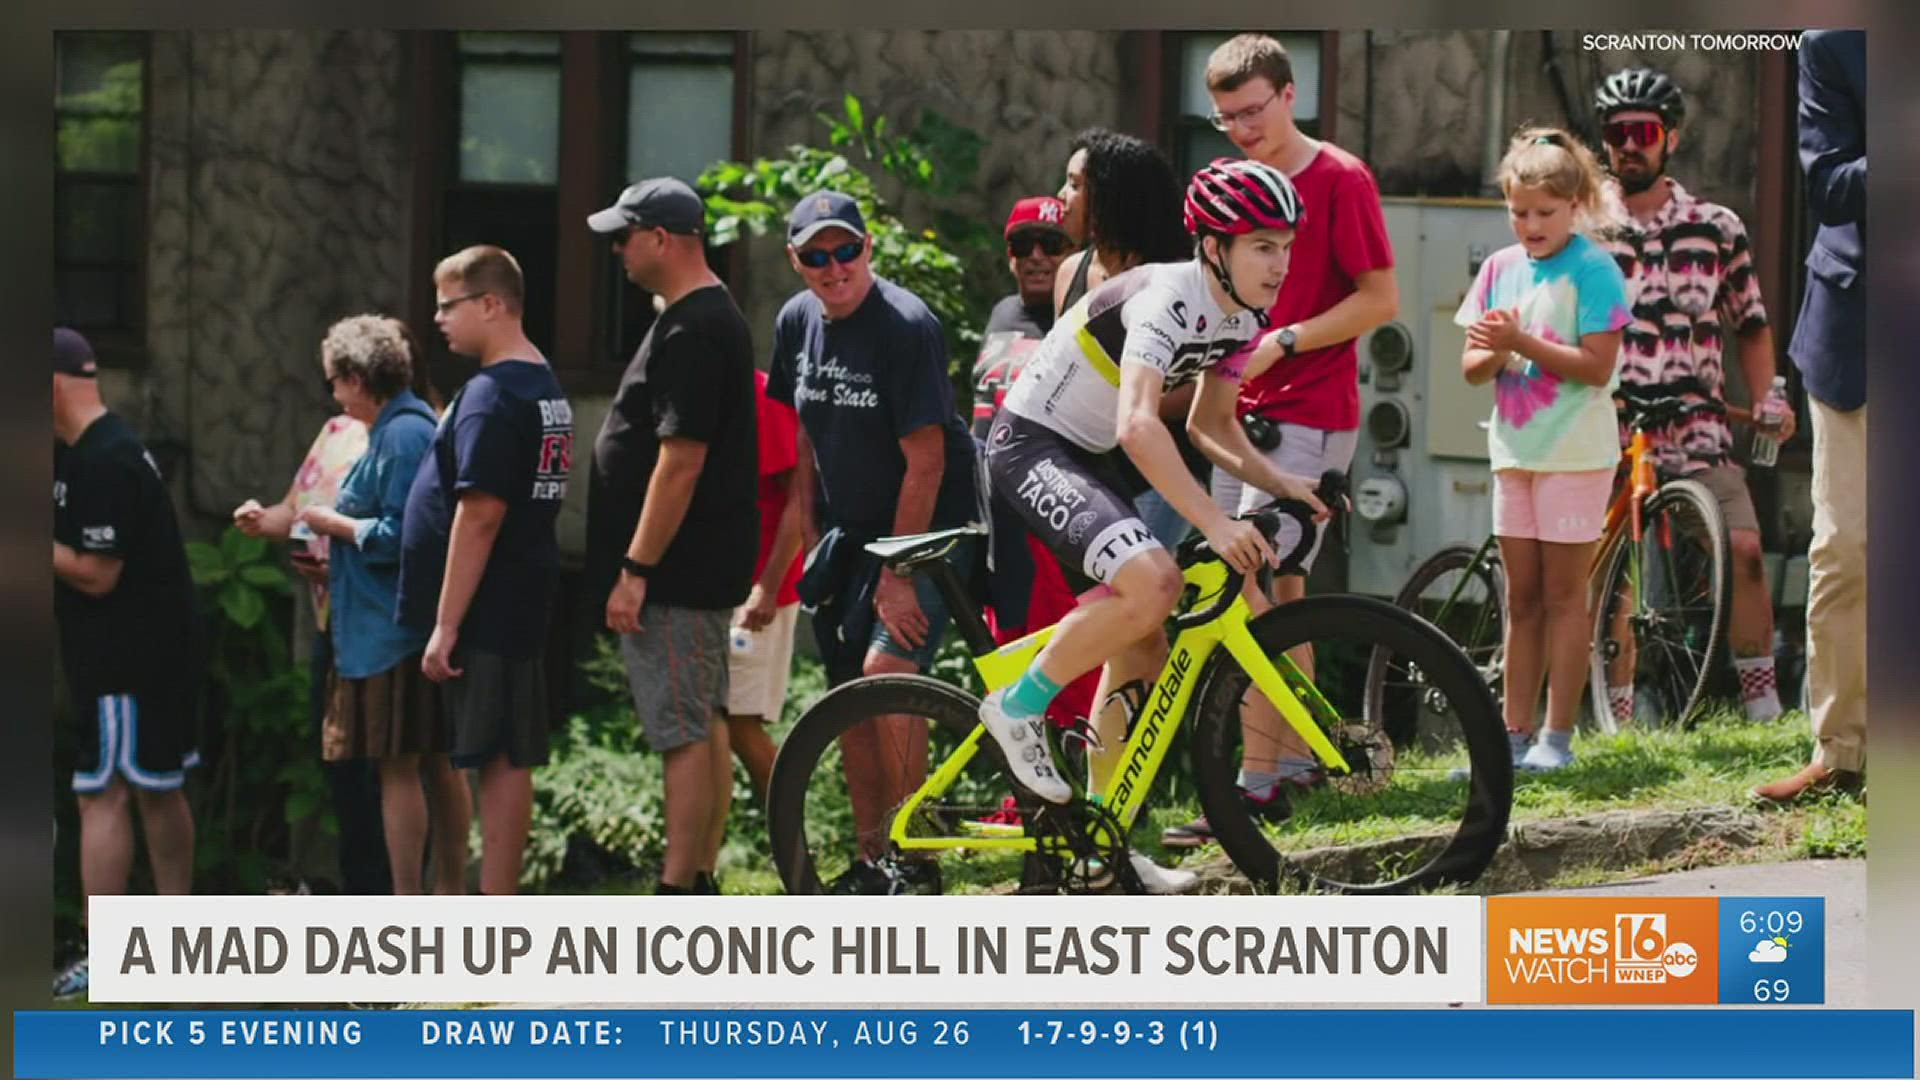 A family-friendly event involving some serious pedal power is back in Scranton this weekend.